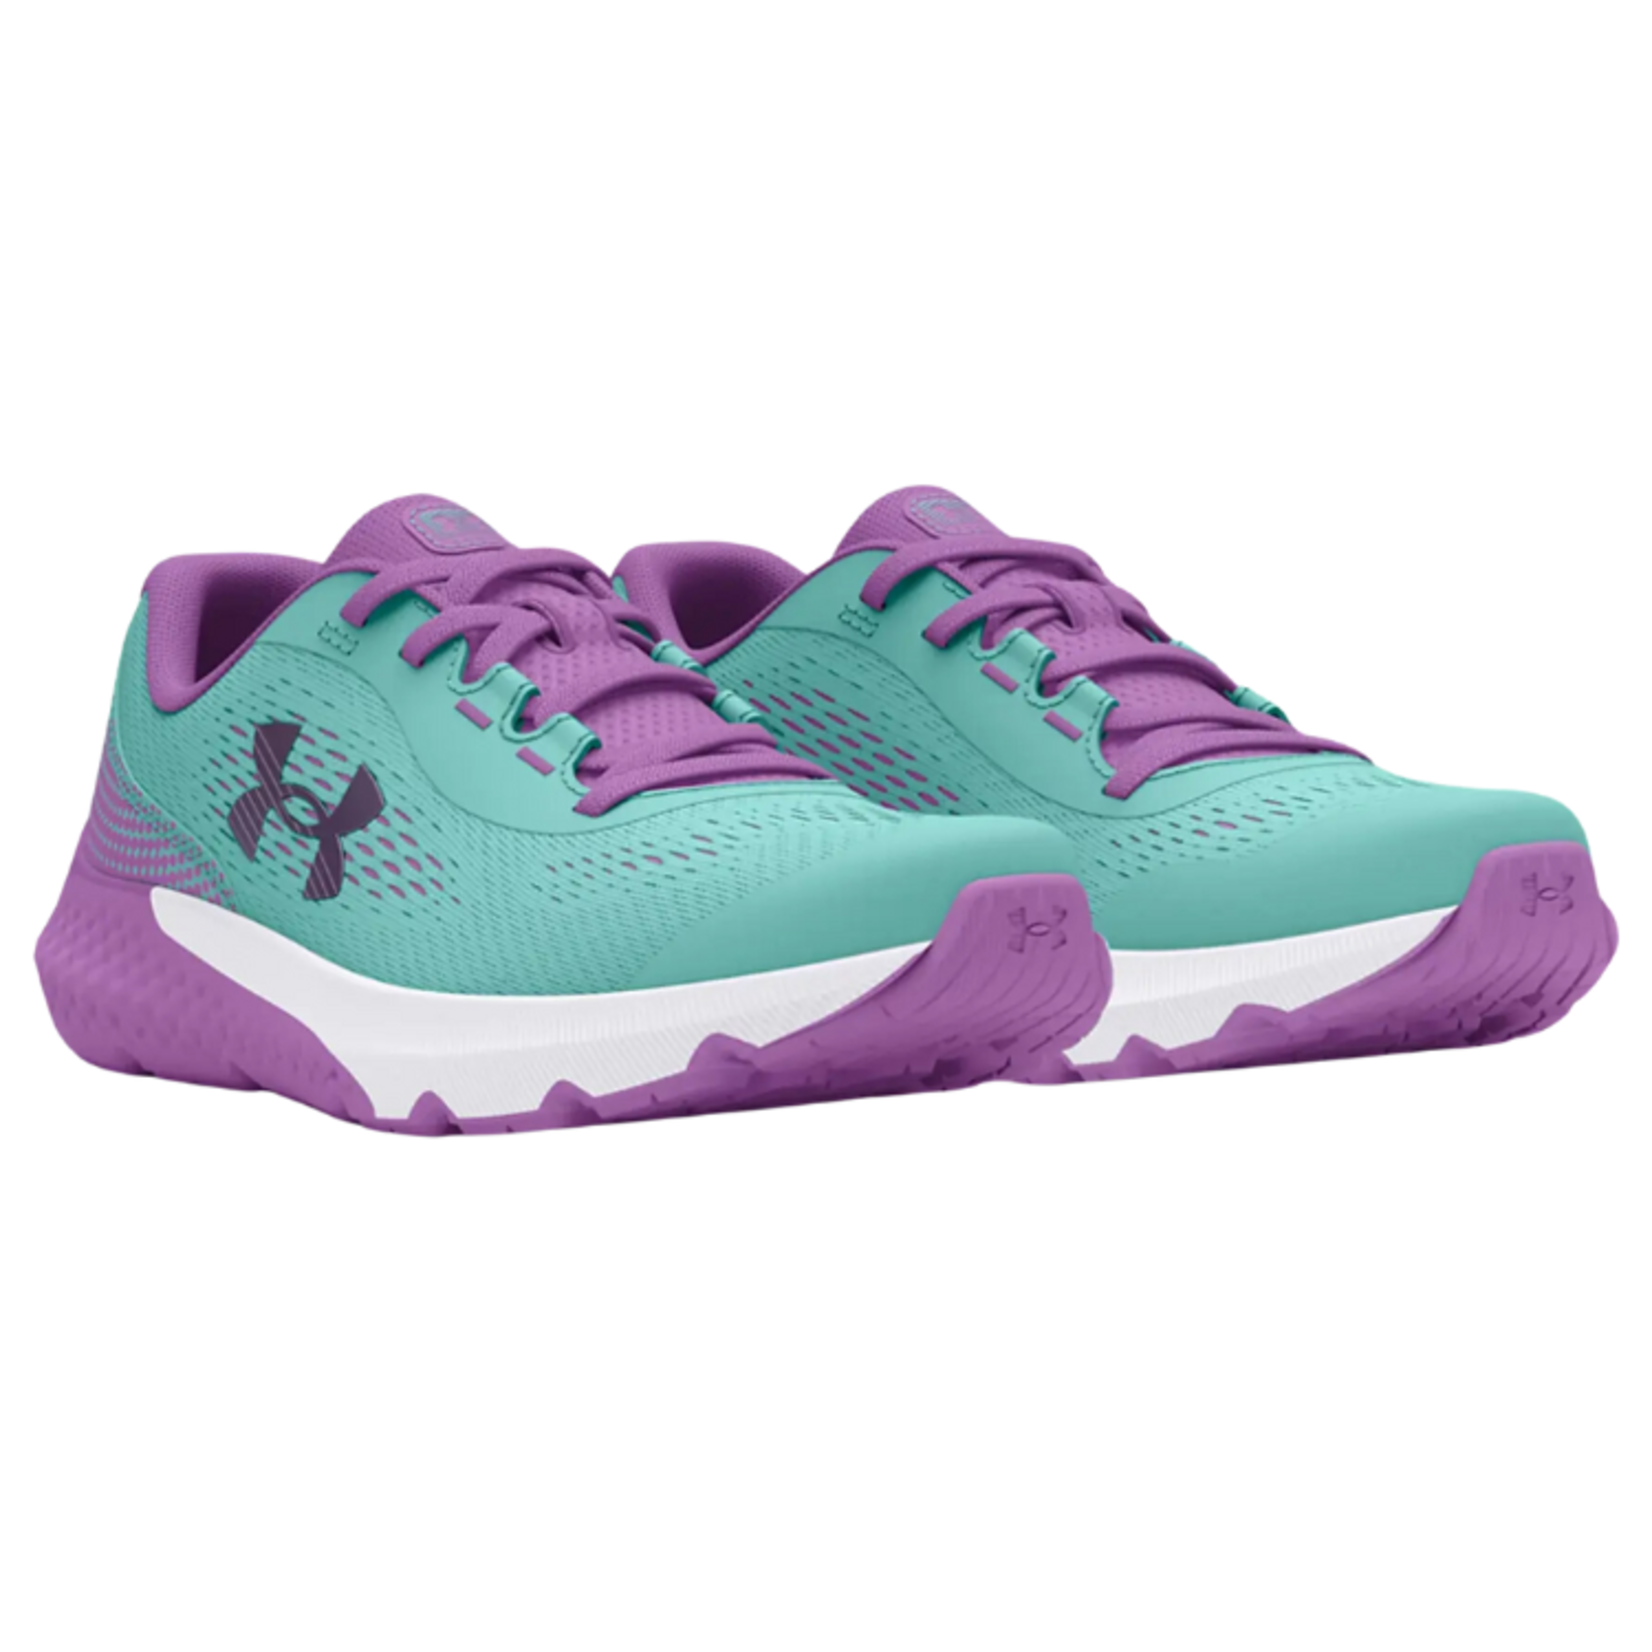 Under Armour Under Armour Running Shoes, Rogue 4 AL, Girls